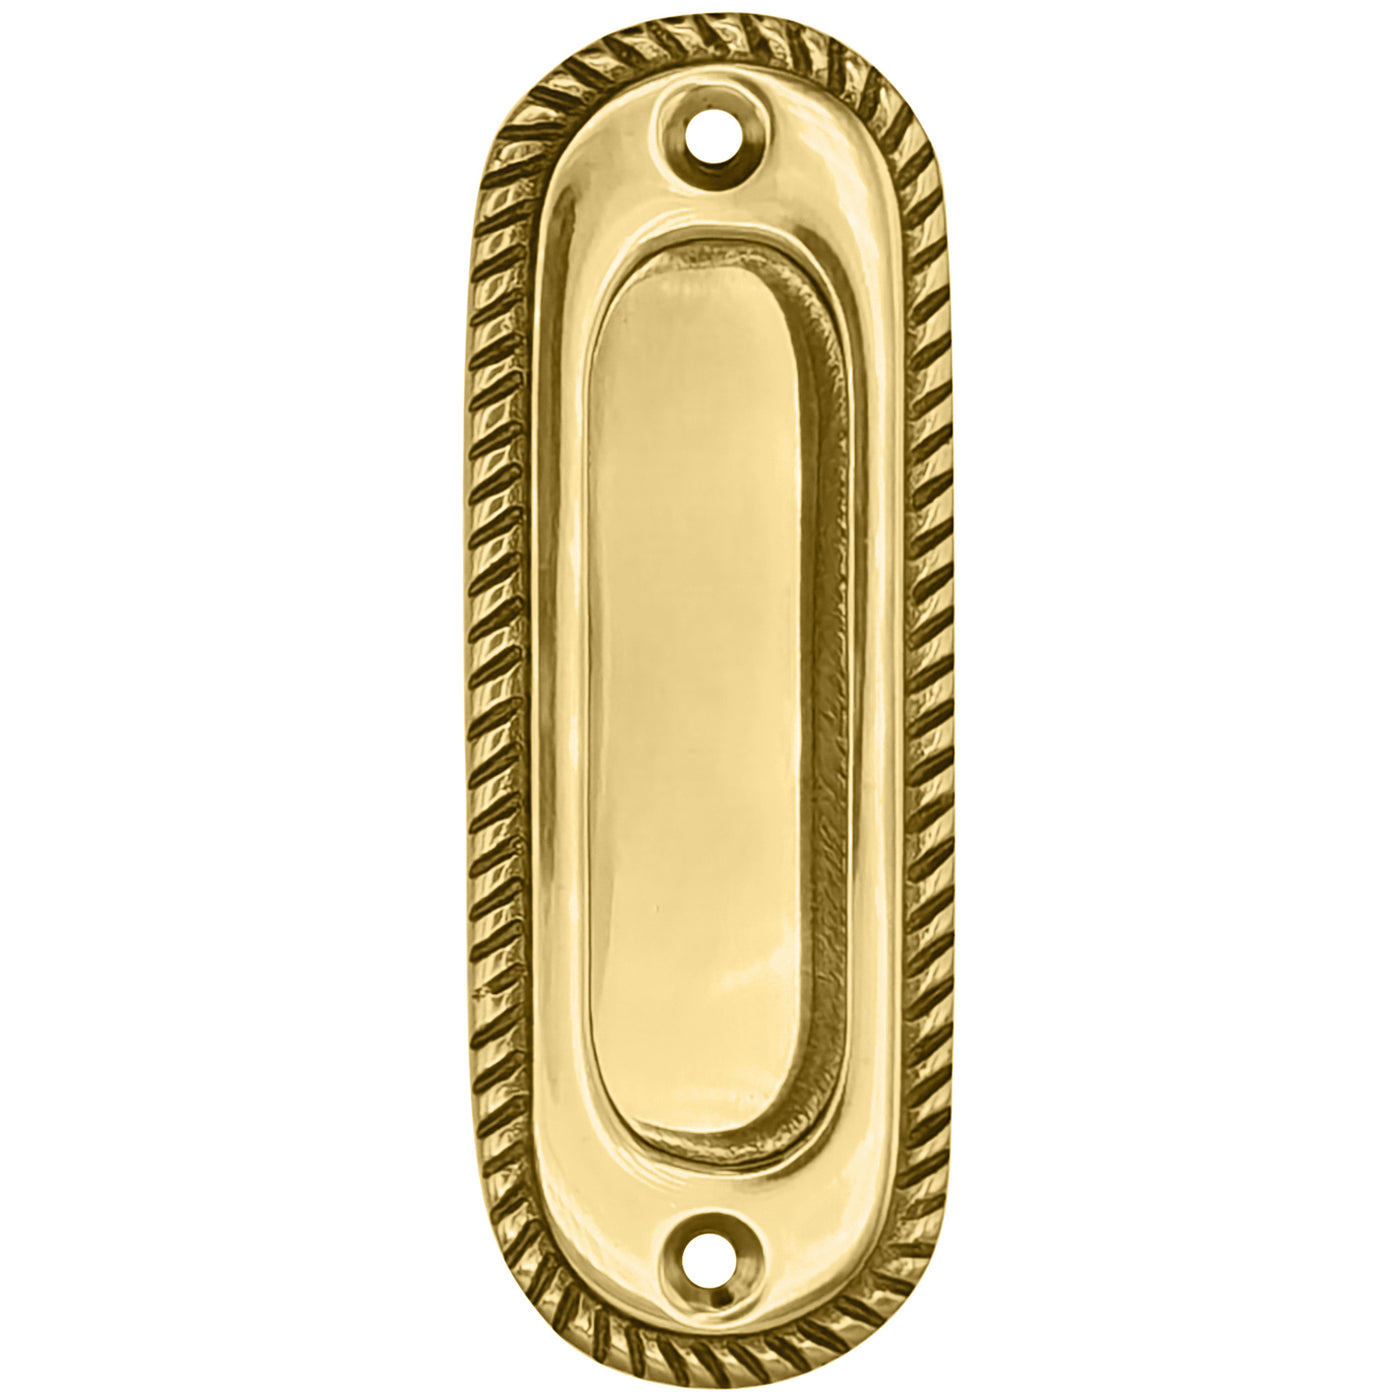 Georgian Rope Oval Pocket Door Pull (Several Finishes Available)